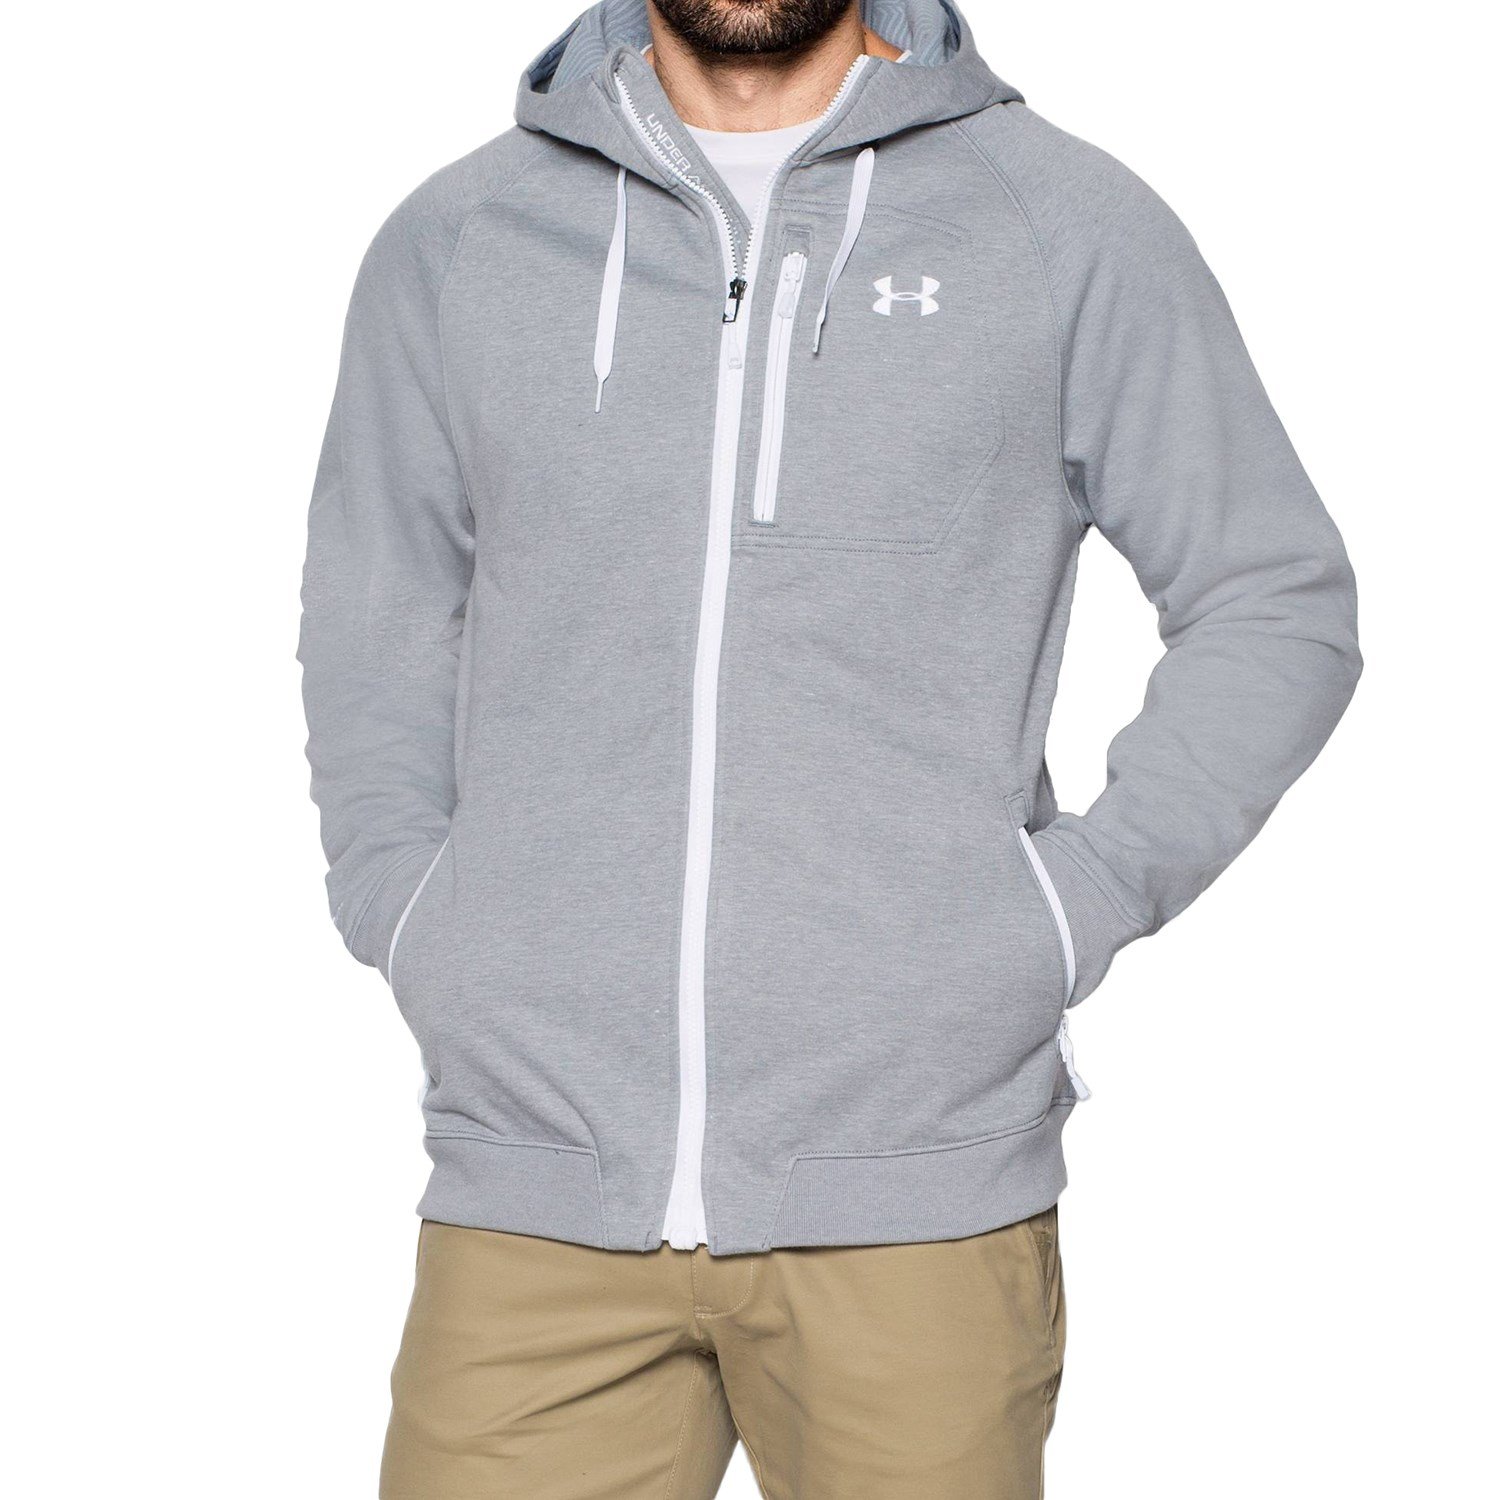 Under Armour ColdGear Hoodie Sweatshirt Pullover Mens Size Small  Silver/Gray NWT